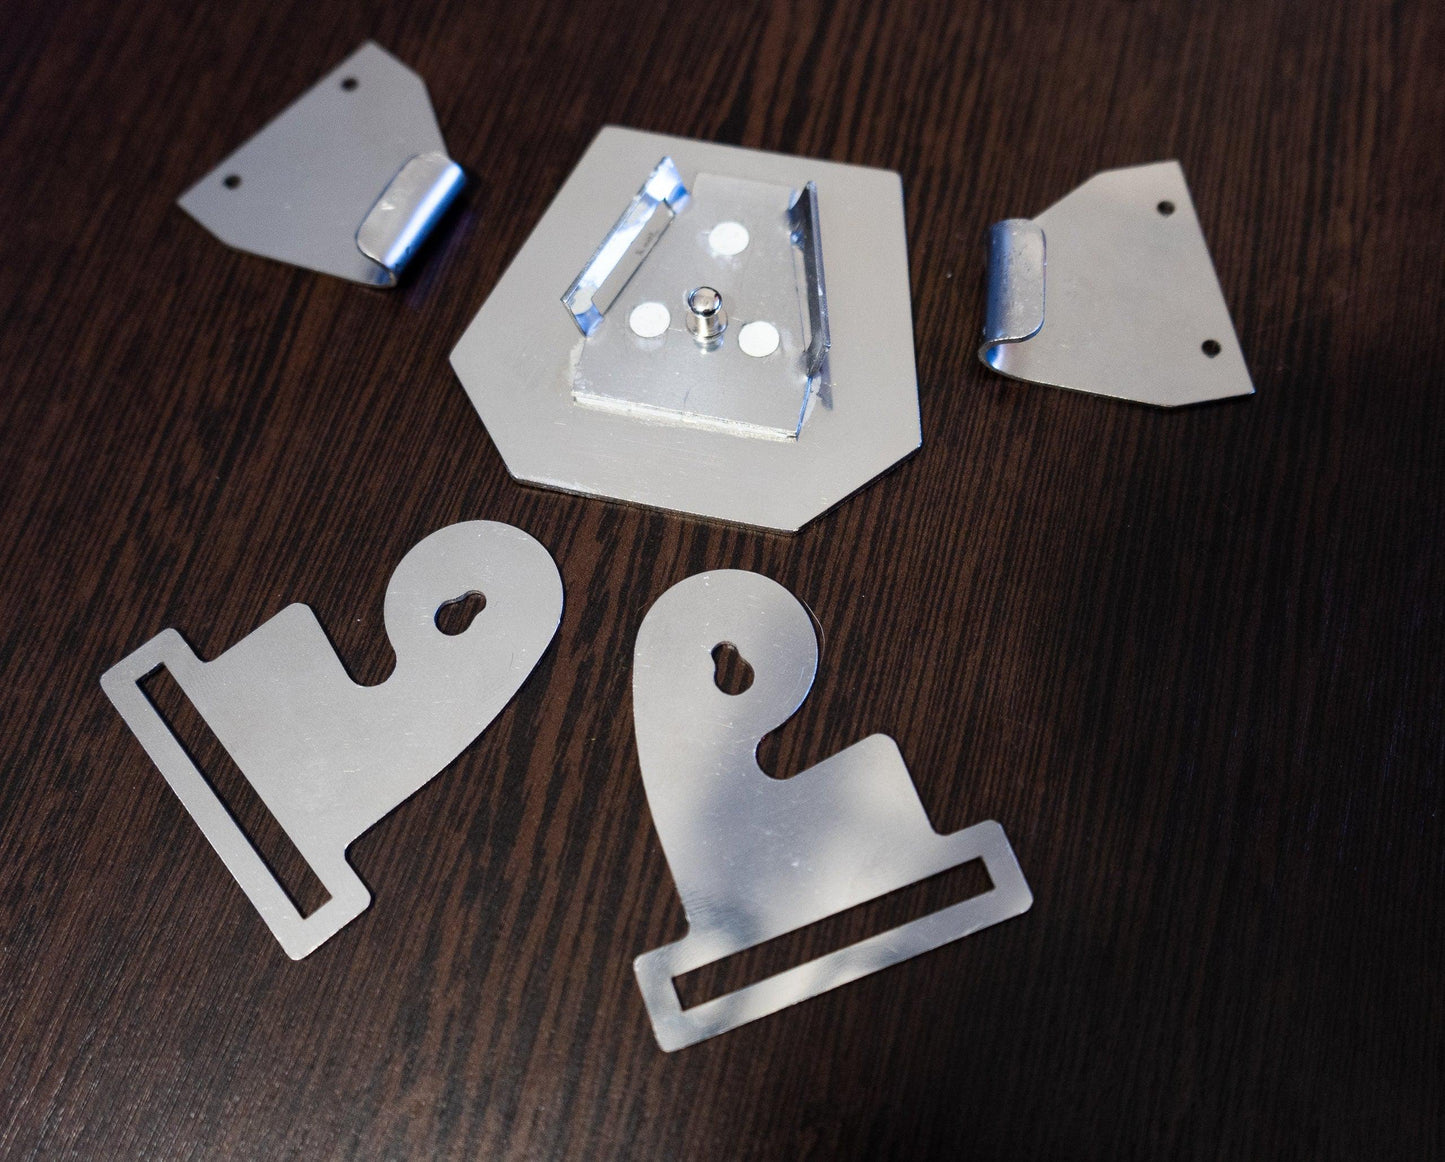 Metal parts kit for making Han Solo's Belt - Buckles and Hooks | Star Wars Cosplay - 3DPrintProps